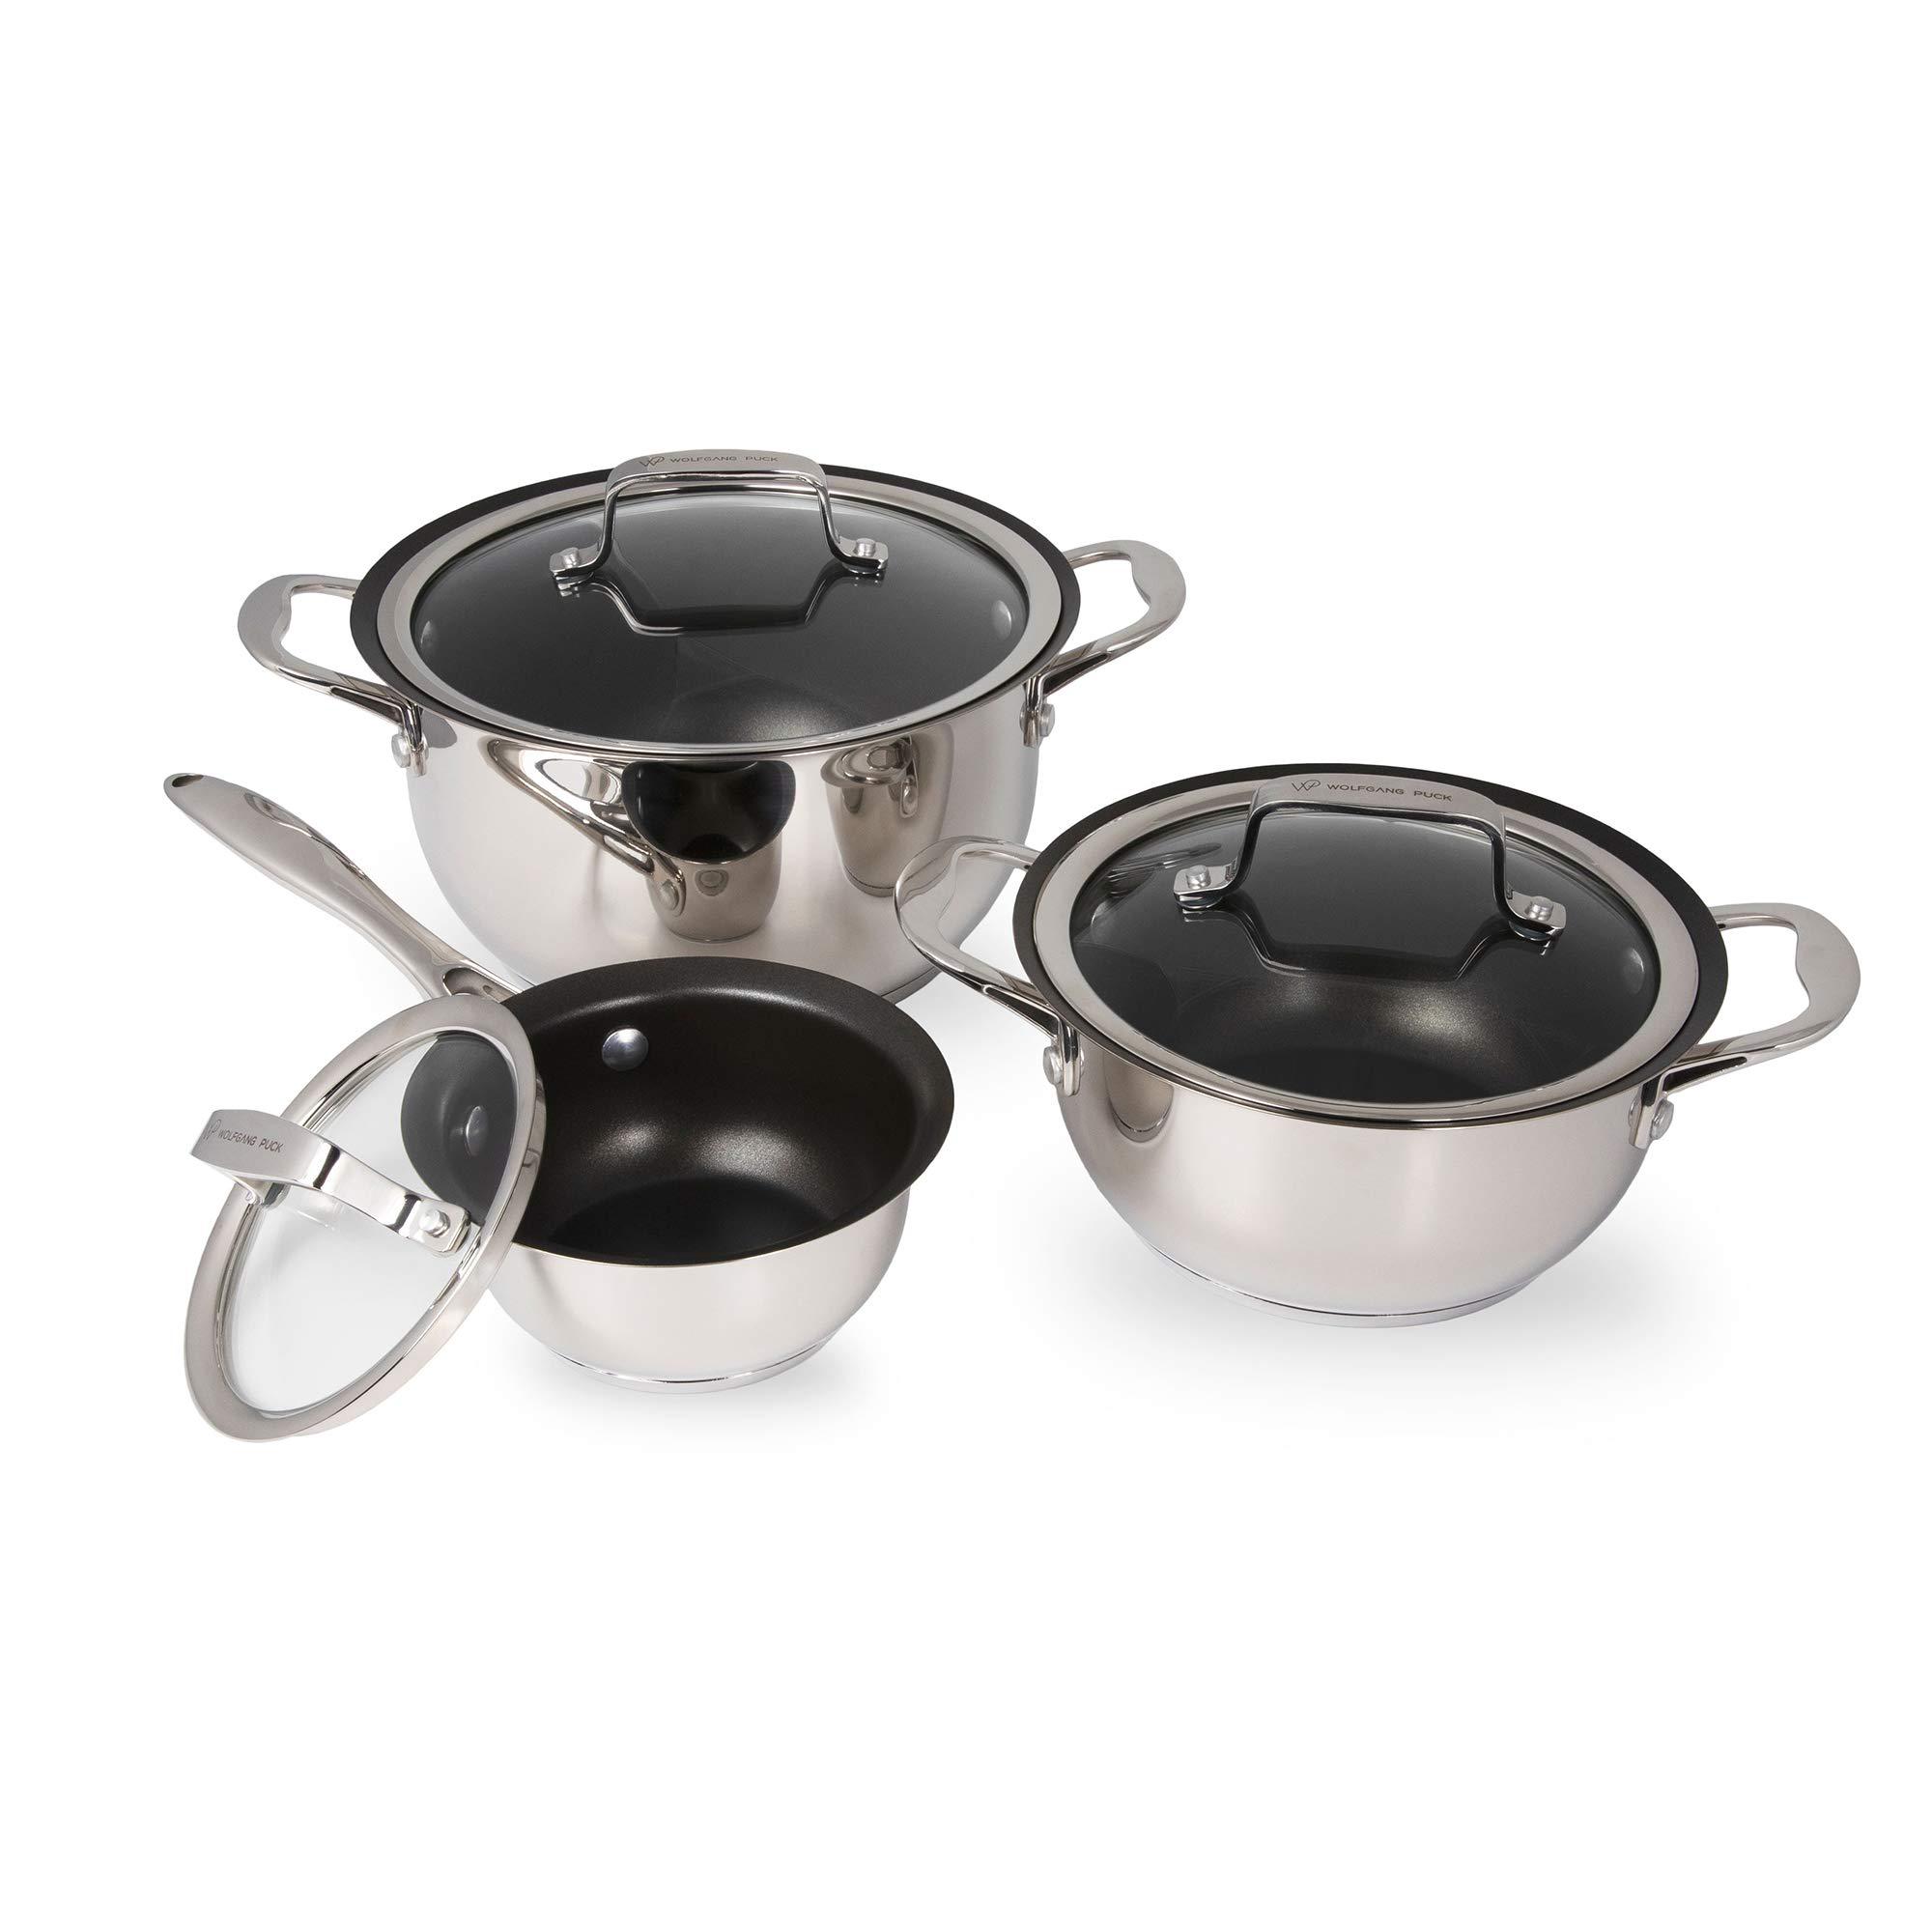 Wolfgang  Puck wolfgang puck 6-piece stainless steel pots and pan set; scratch-resistant non-stick cookware, clear tempered-glass lids, cool